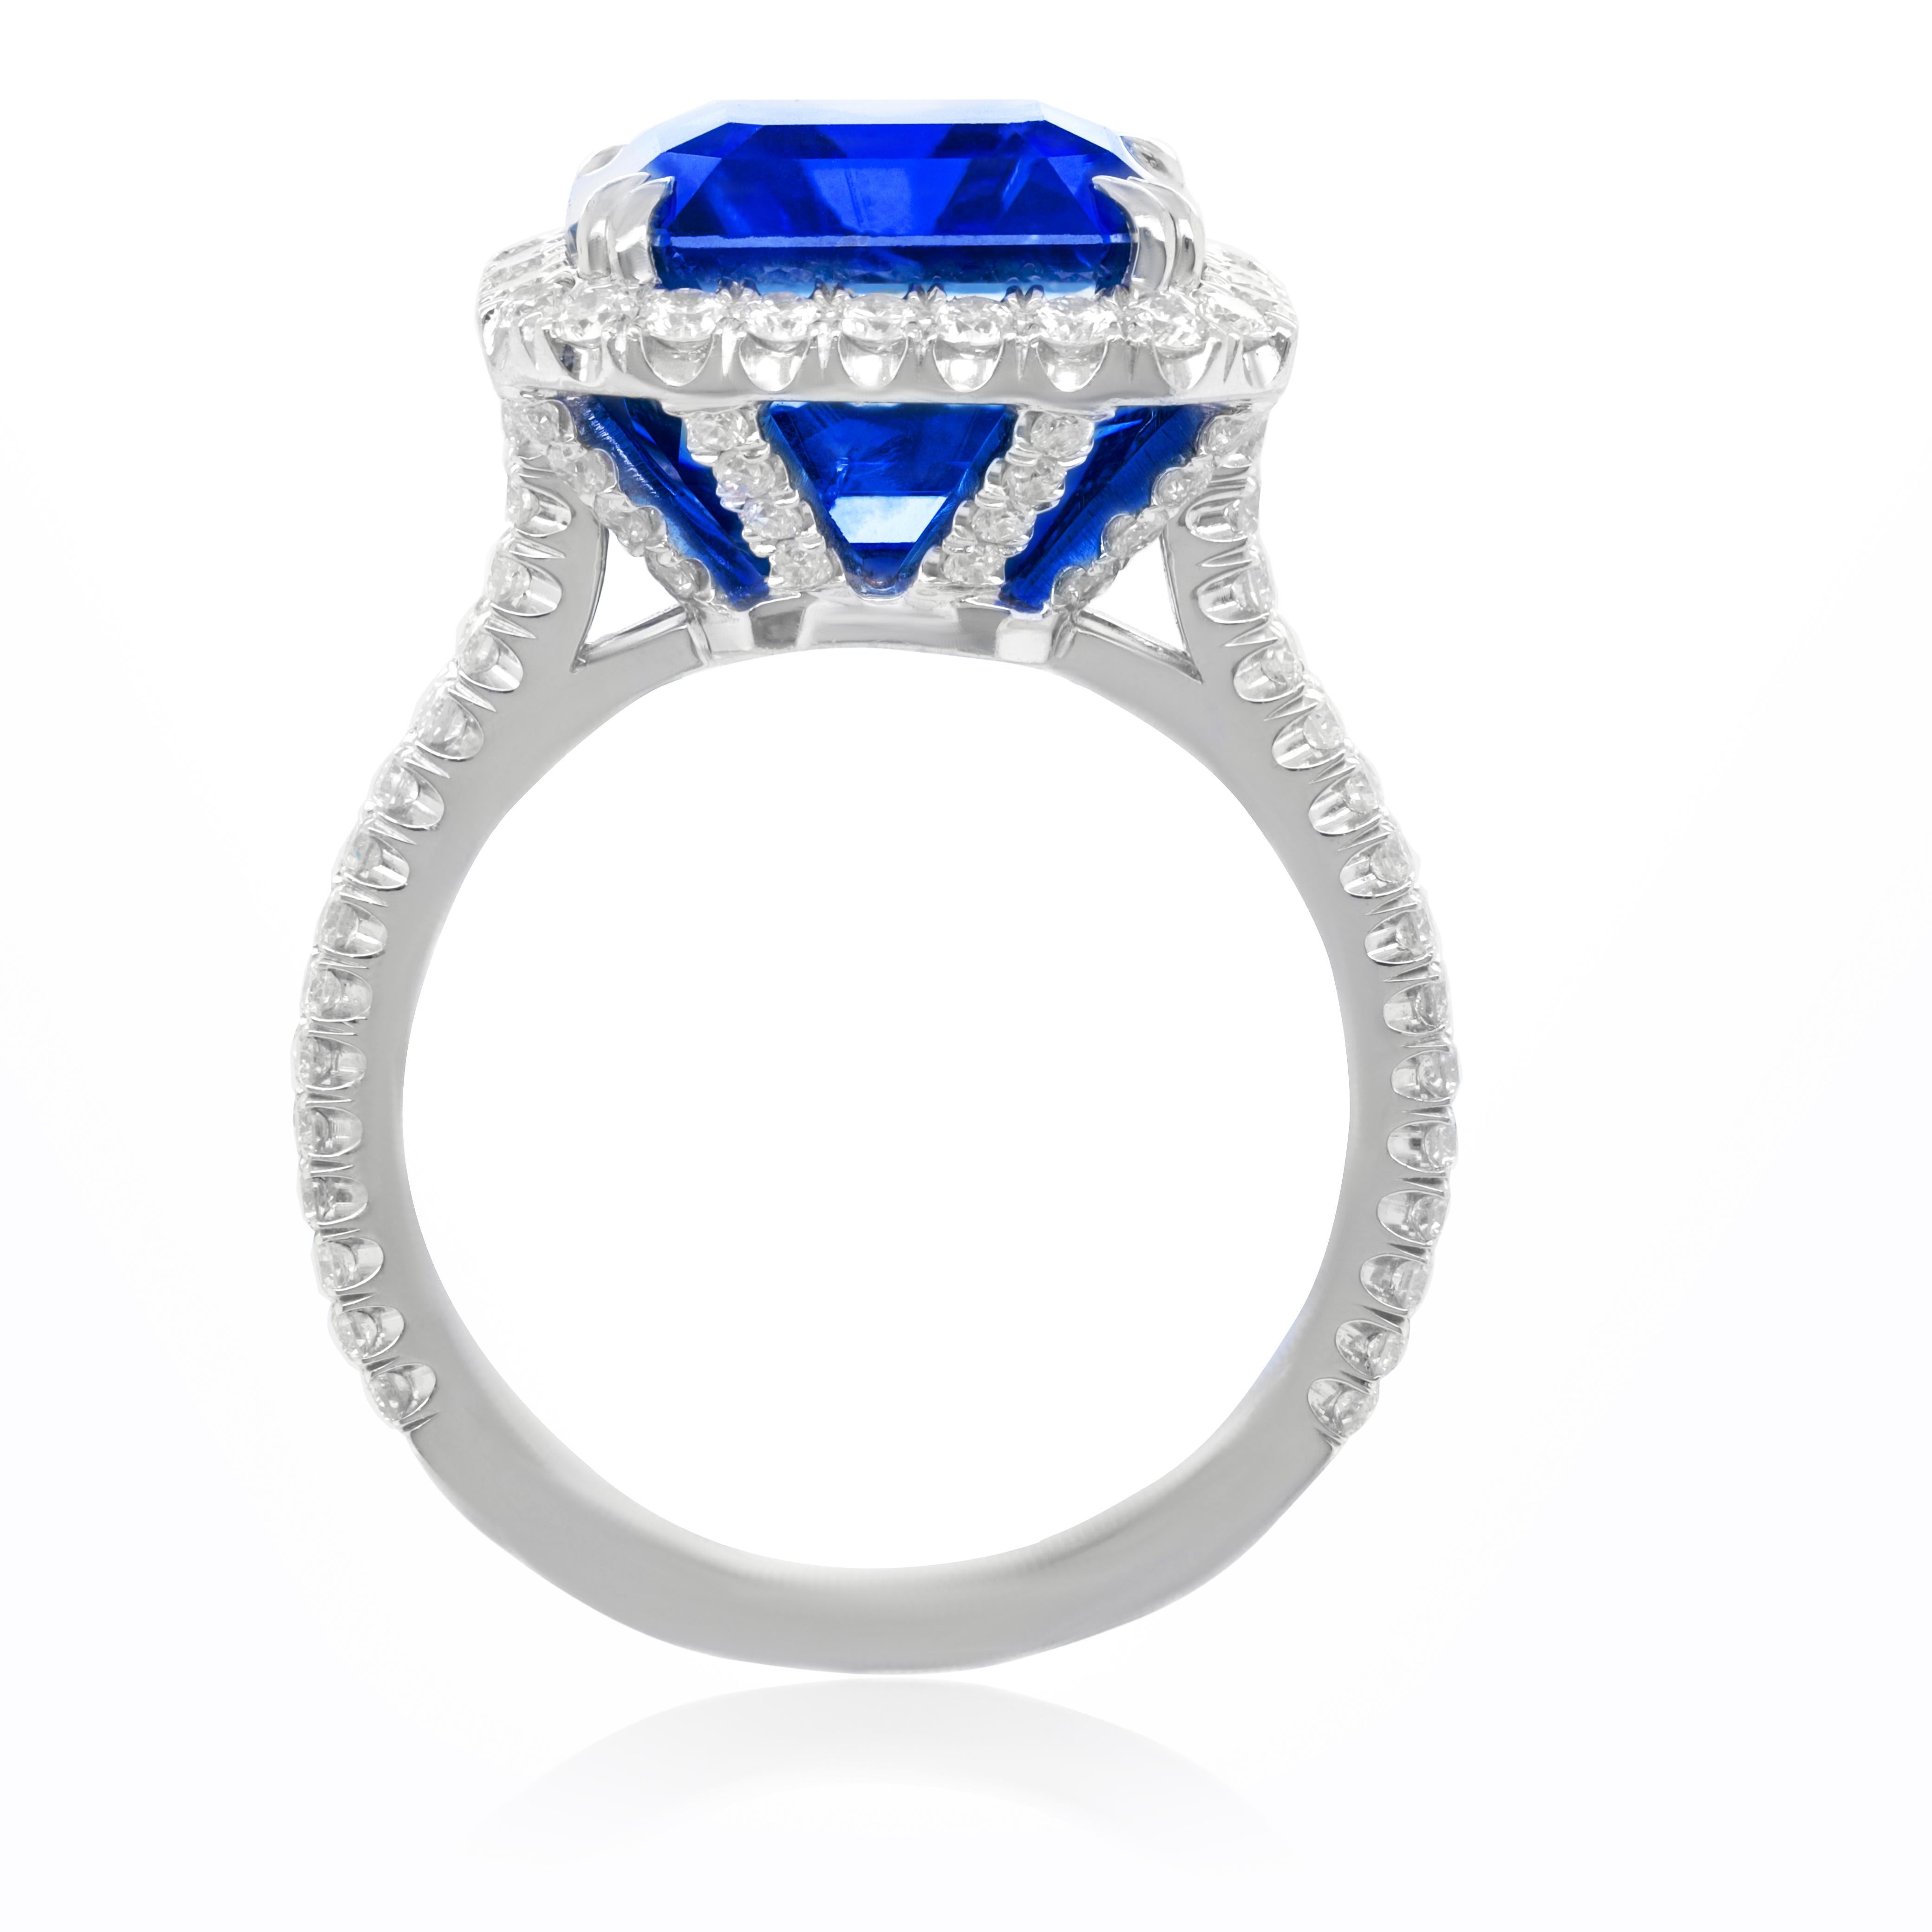 Platinum sapphire and diamond ring featuring a 13.42 ct Gublin certified unheated emerald cut Ceylon sapphire (no heat) surrounded with 2 rows of diamonds totaling 1.75 cts tw
Diana M. is a leading supplier of top-quality fine jewelry for over 35